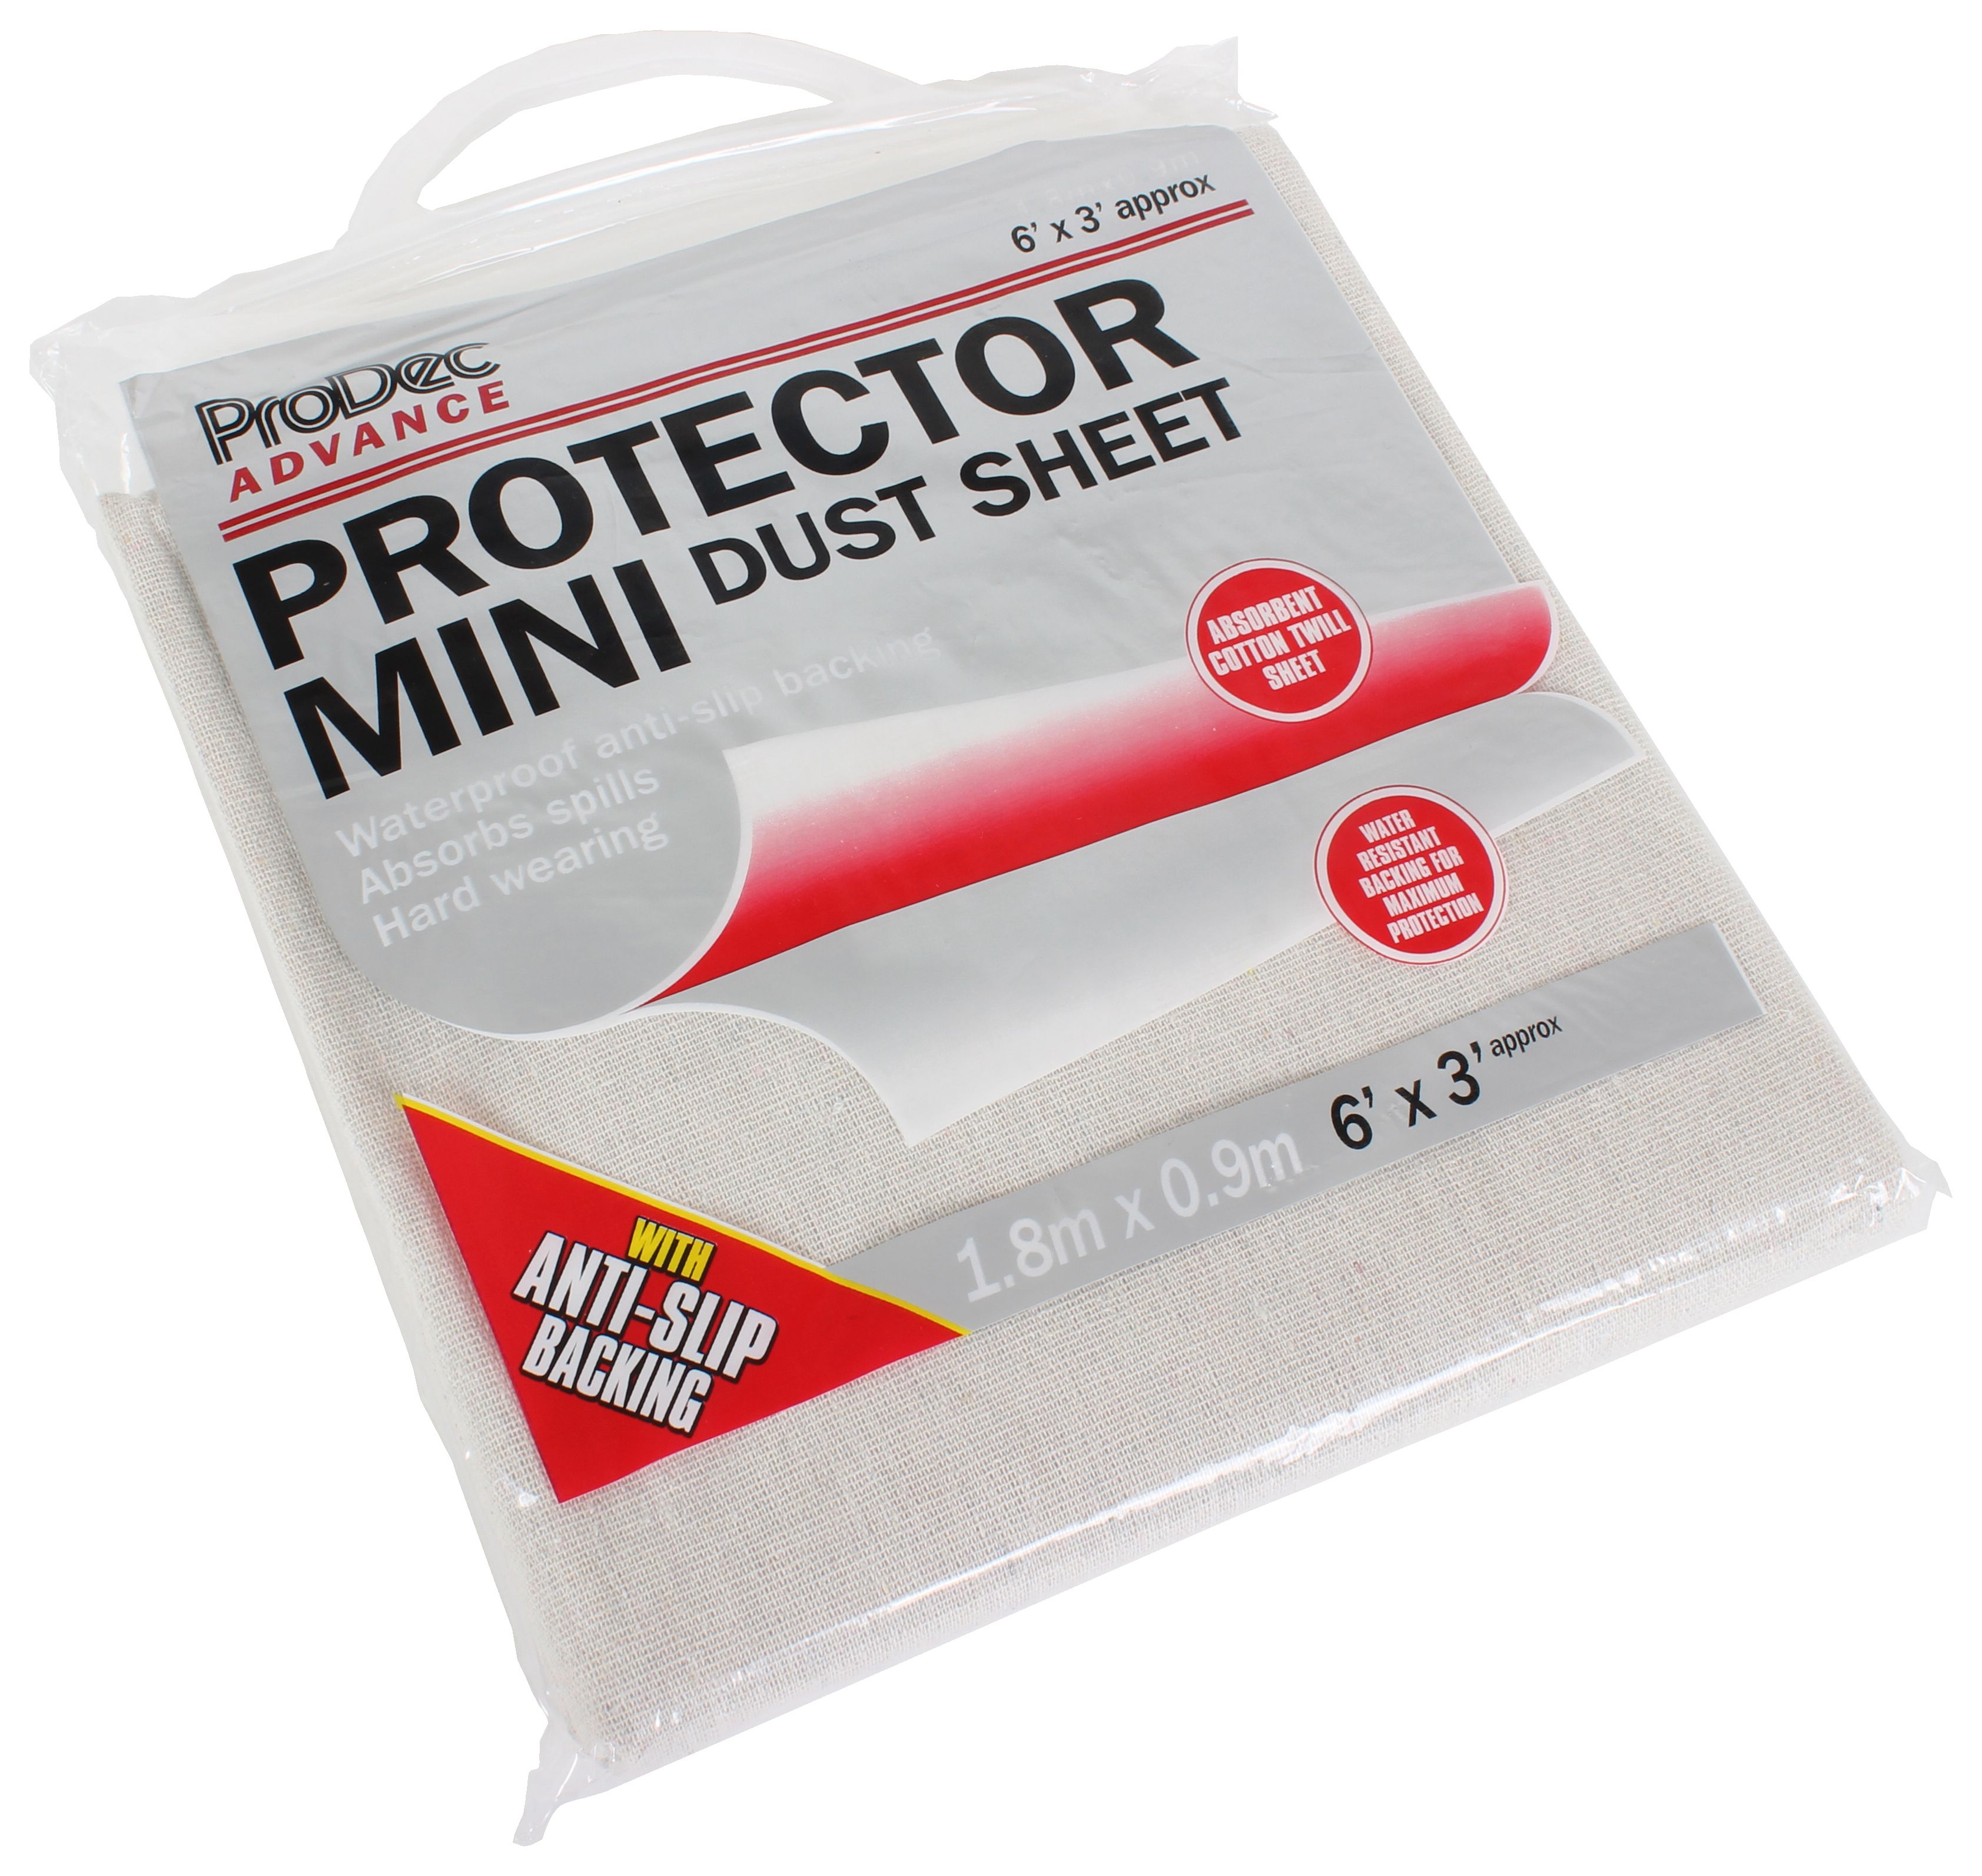 Image of ProDec Advance Protector Dust Sheet - 6 x 3ft